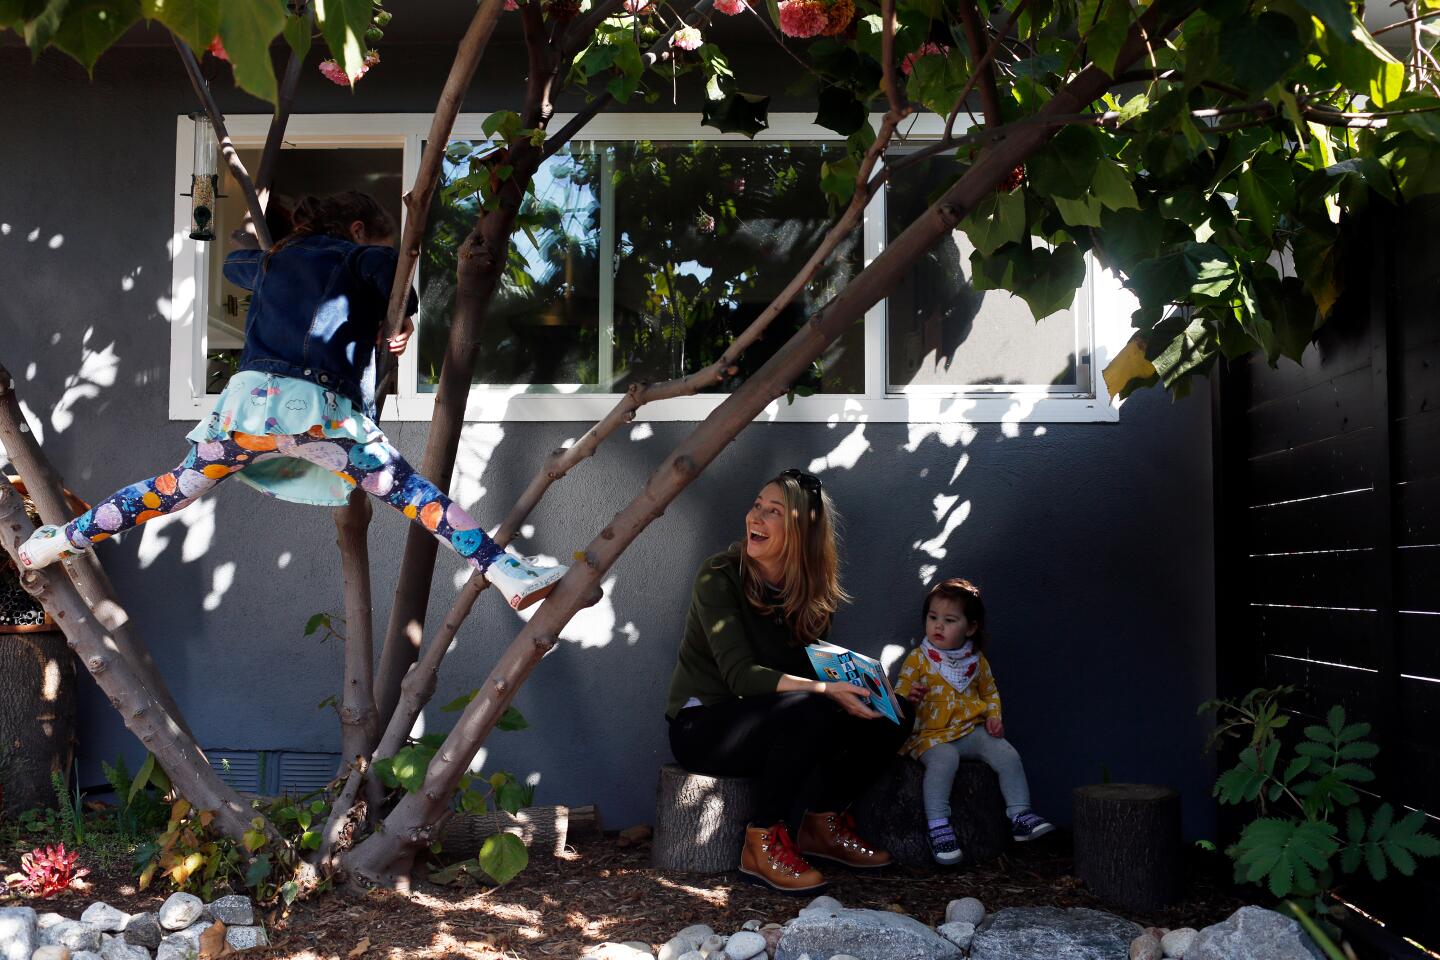 Nili Glatstein climbs a Dombeya wallichii tree, left, with mom Allison and Talia Glatstein, right, in what was previously the driveway.